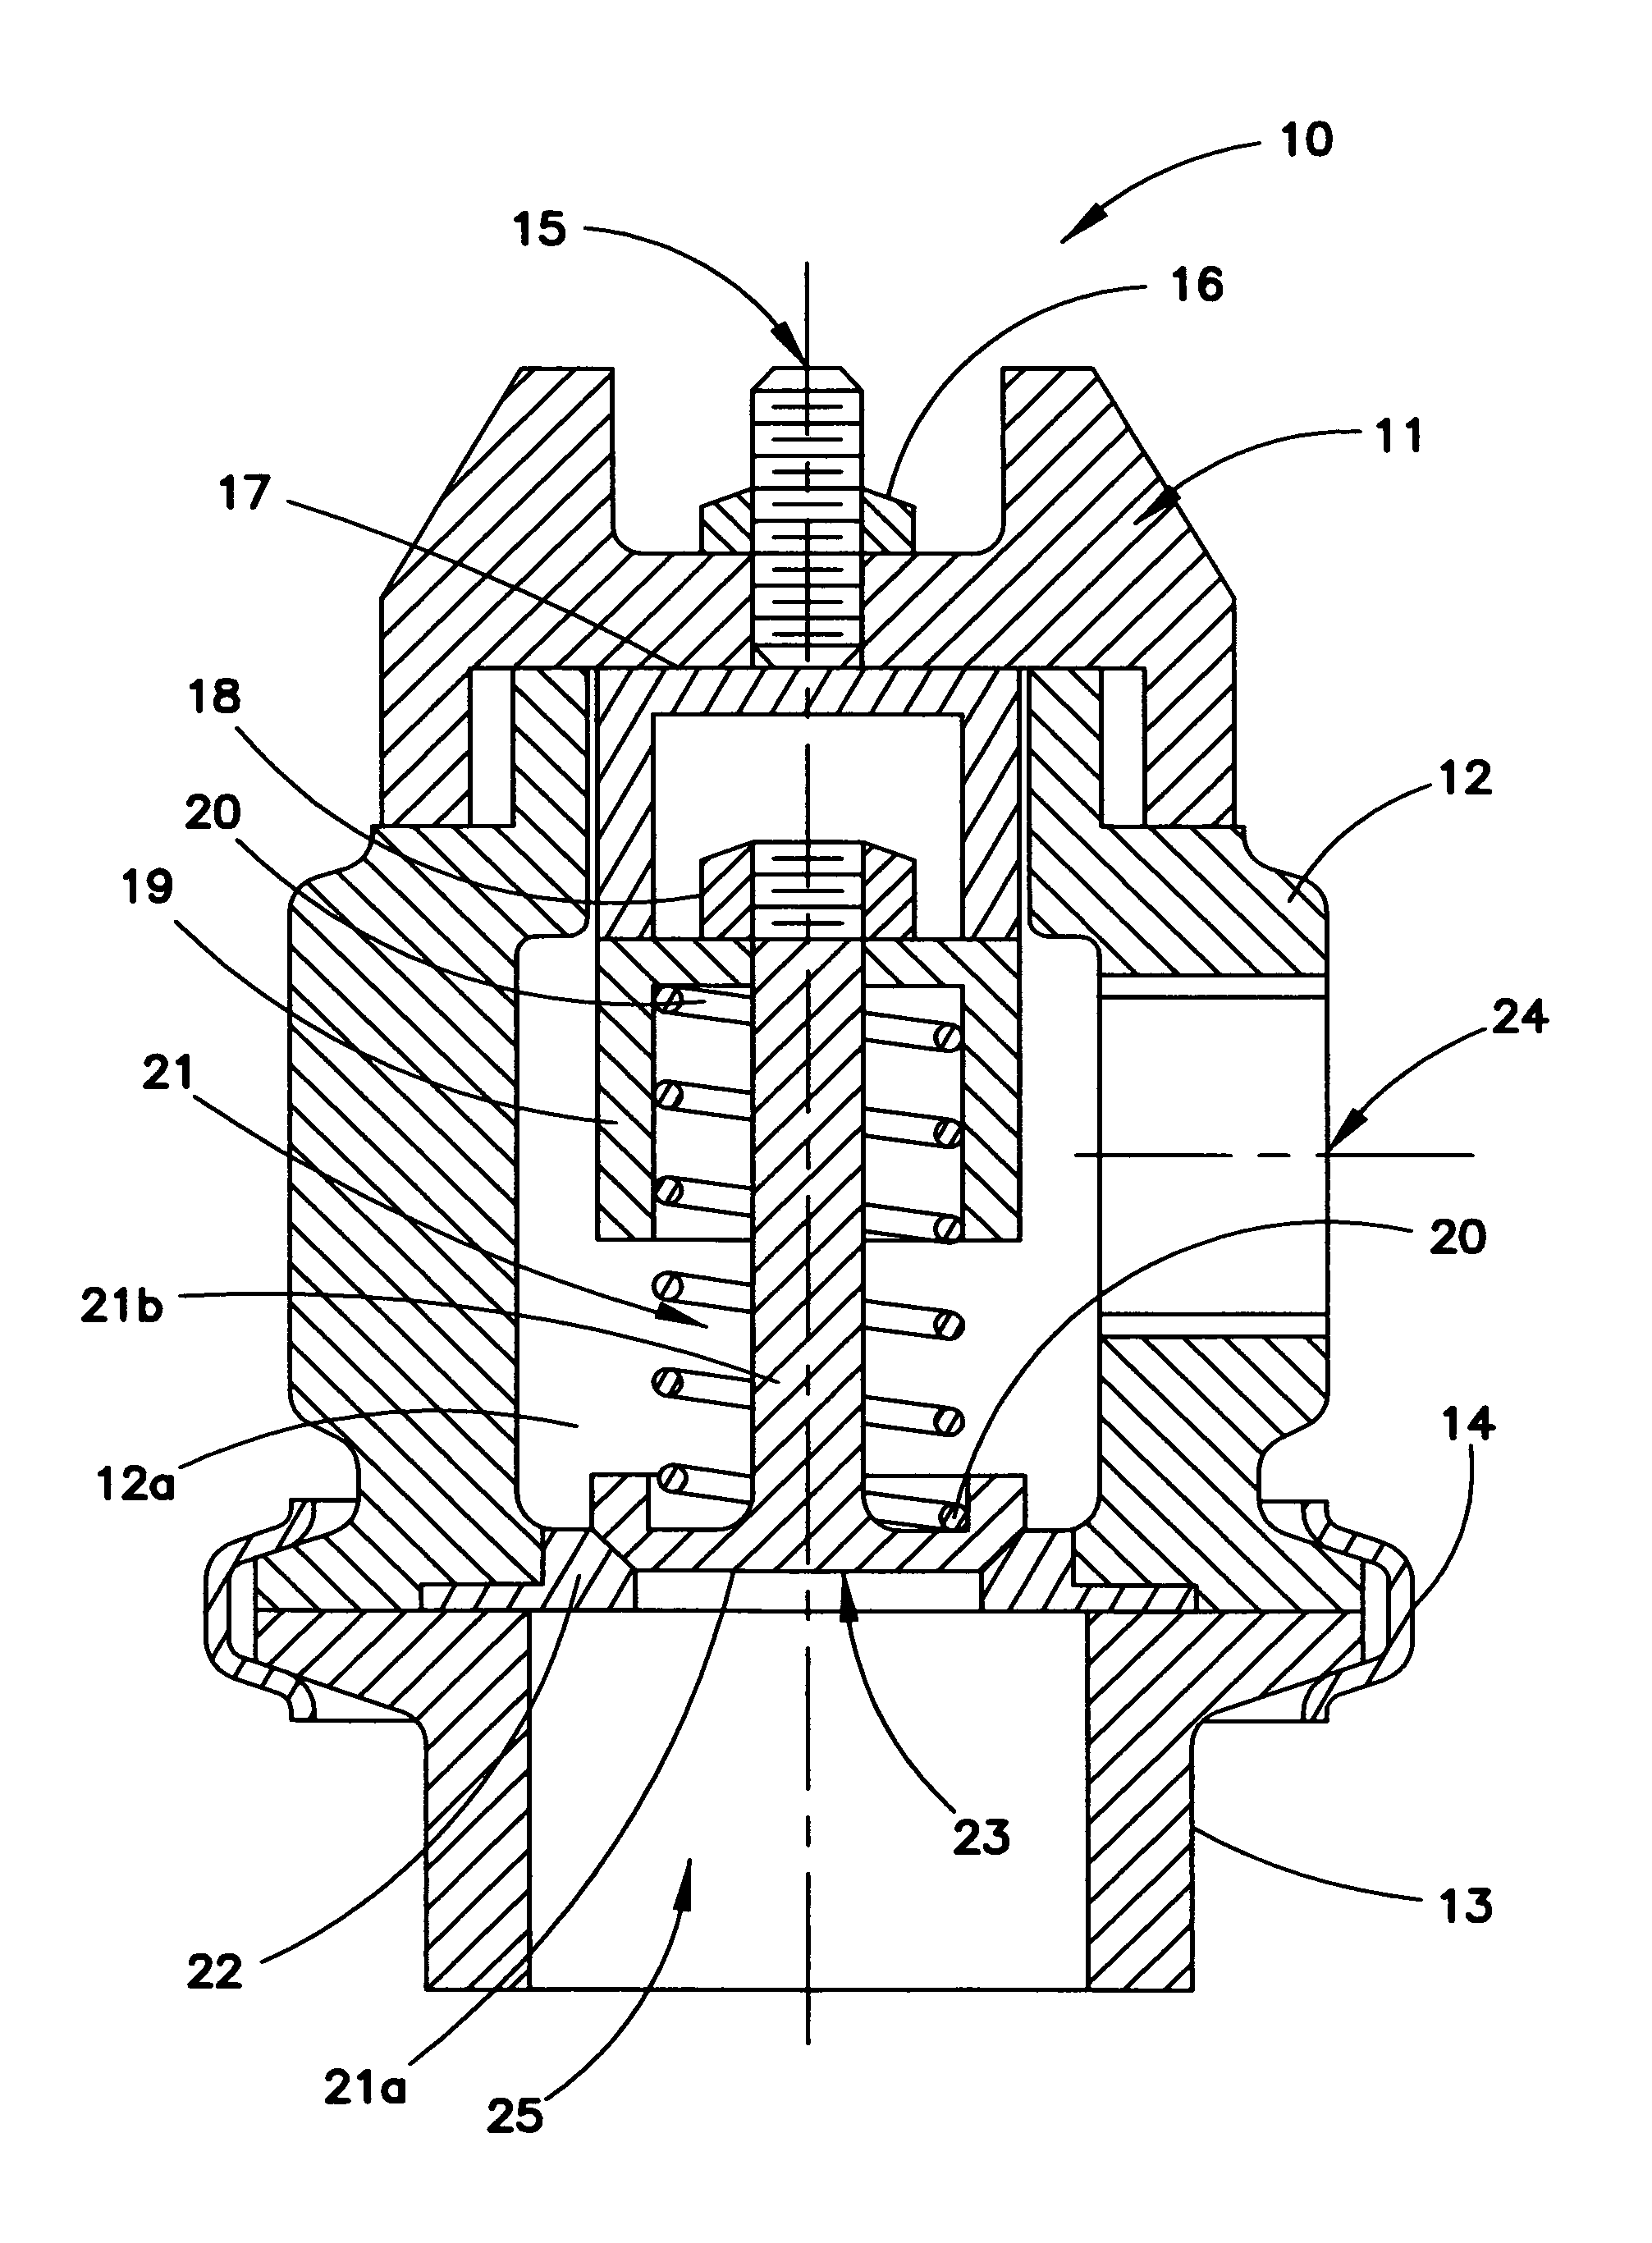 Boost pressure control system for turbocharged internal combustion engines